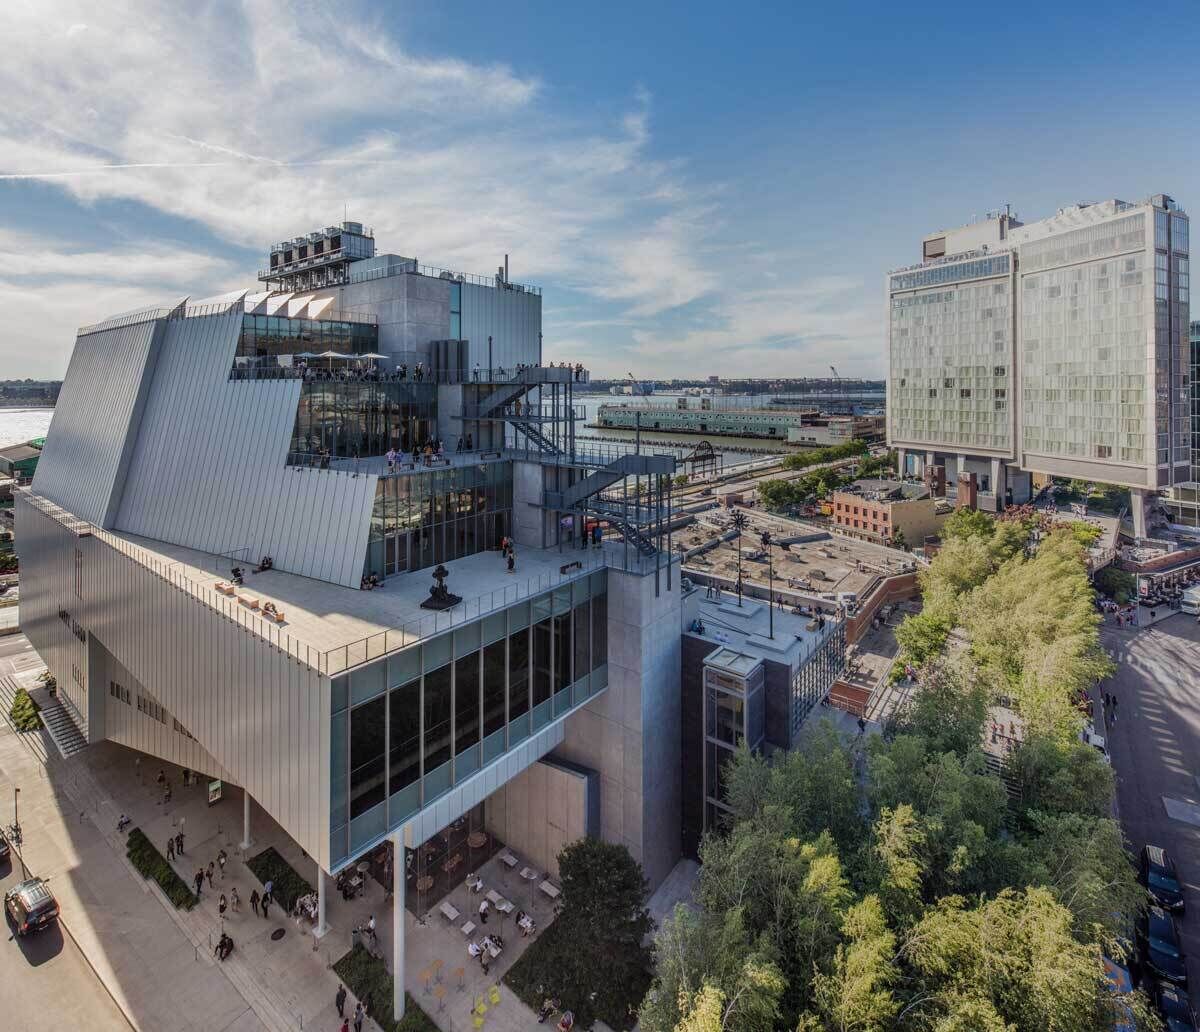 An image of the Whitney Museum from above on a sunny day. People are visible milling about at the entrance to the museum and on the terraces.